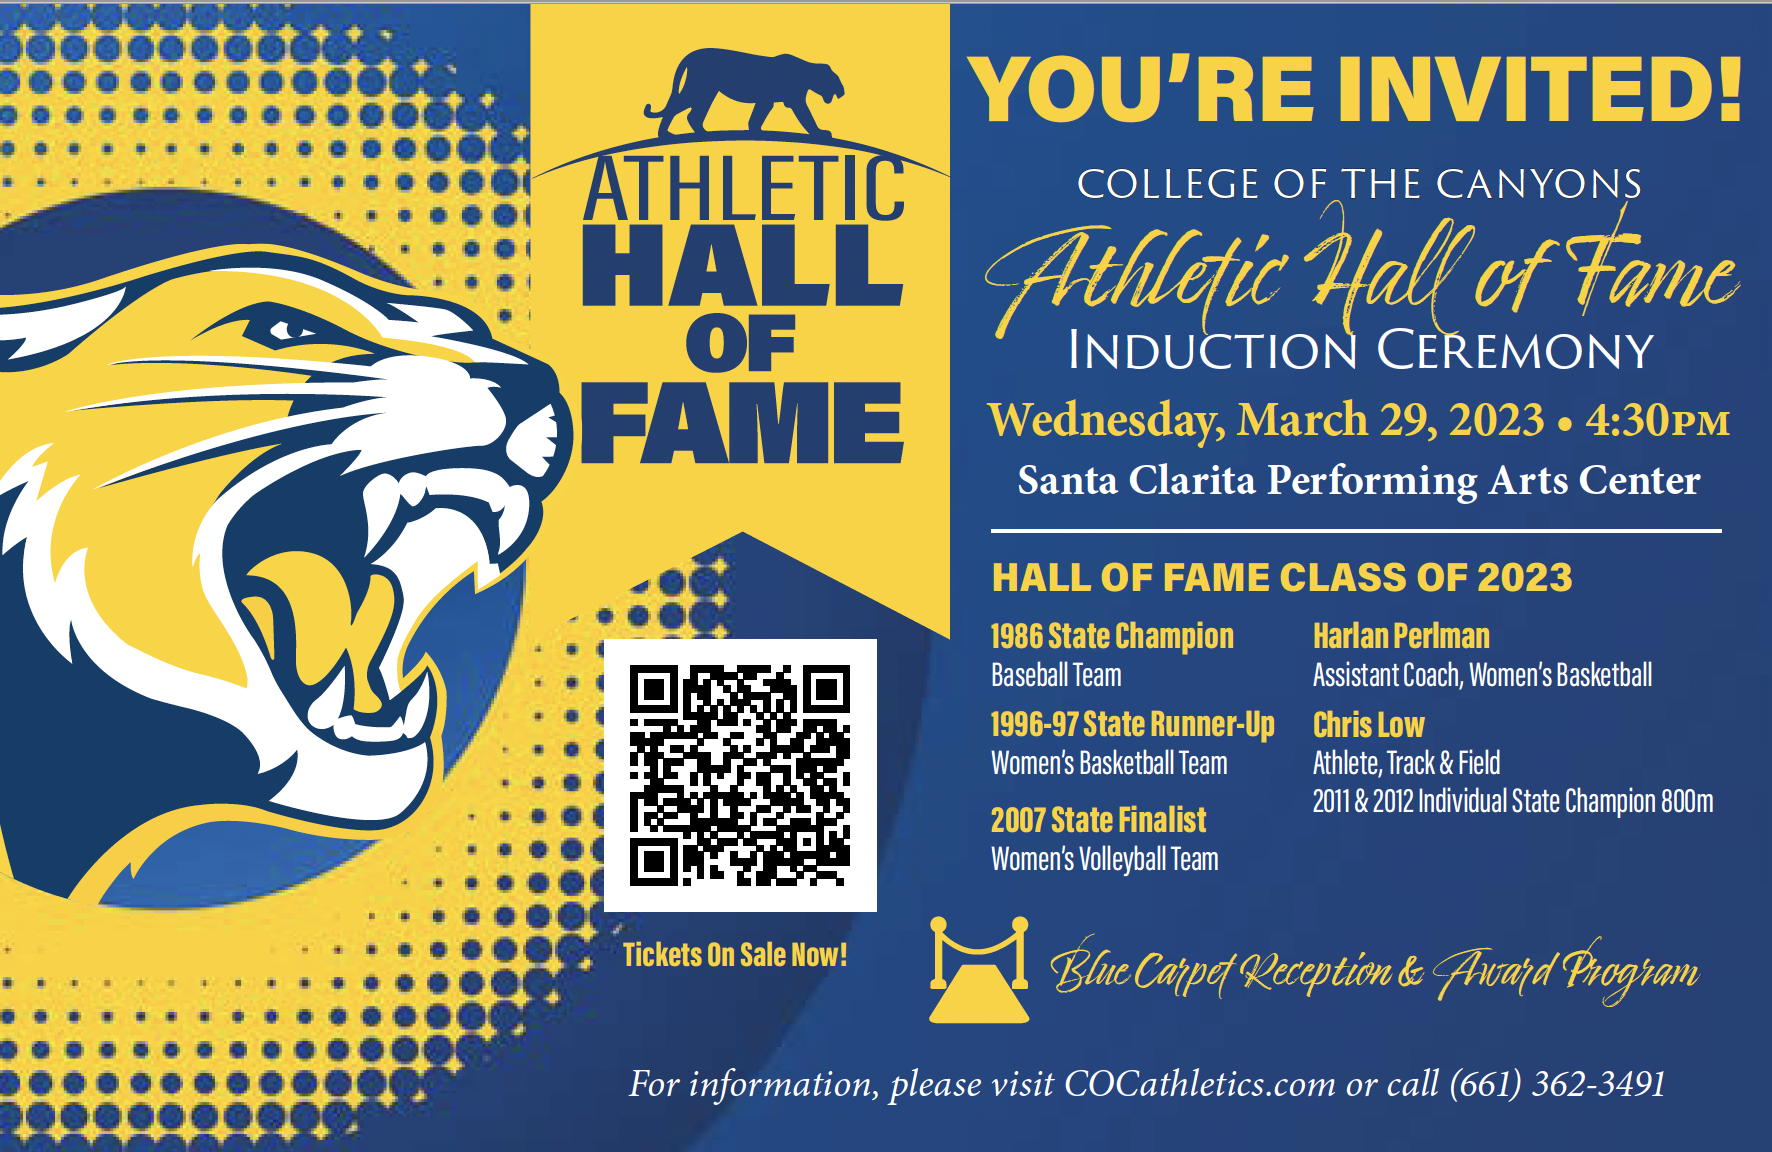 College of the Canyons Athletic Hall of Fame invitation.